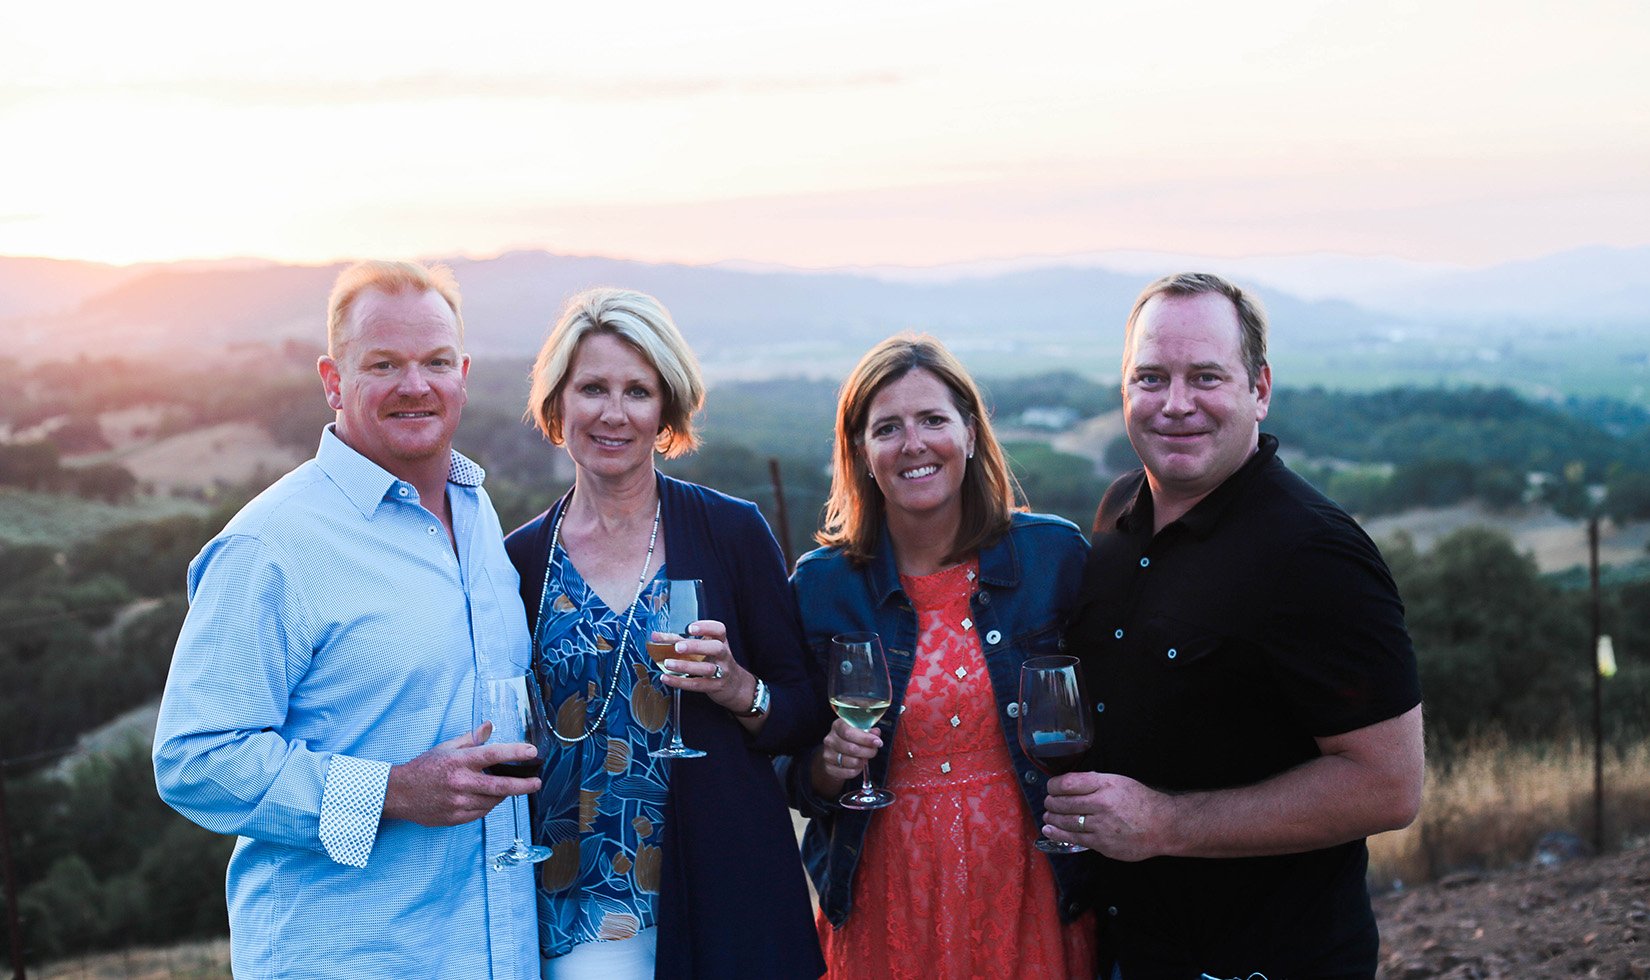 4 guests at Vista Point at Jordan Winery in wine country casual attire. The men are wearing button down shirts. The left woman is in a flowy tank top and cardigan while the woman on the right is in a lace floral dress with a denim jacket.